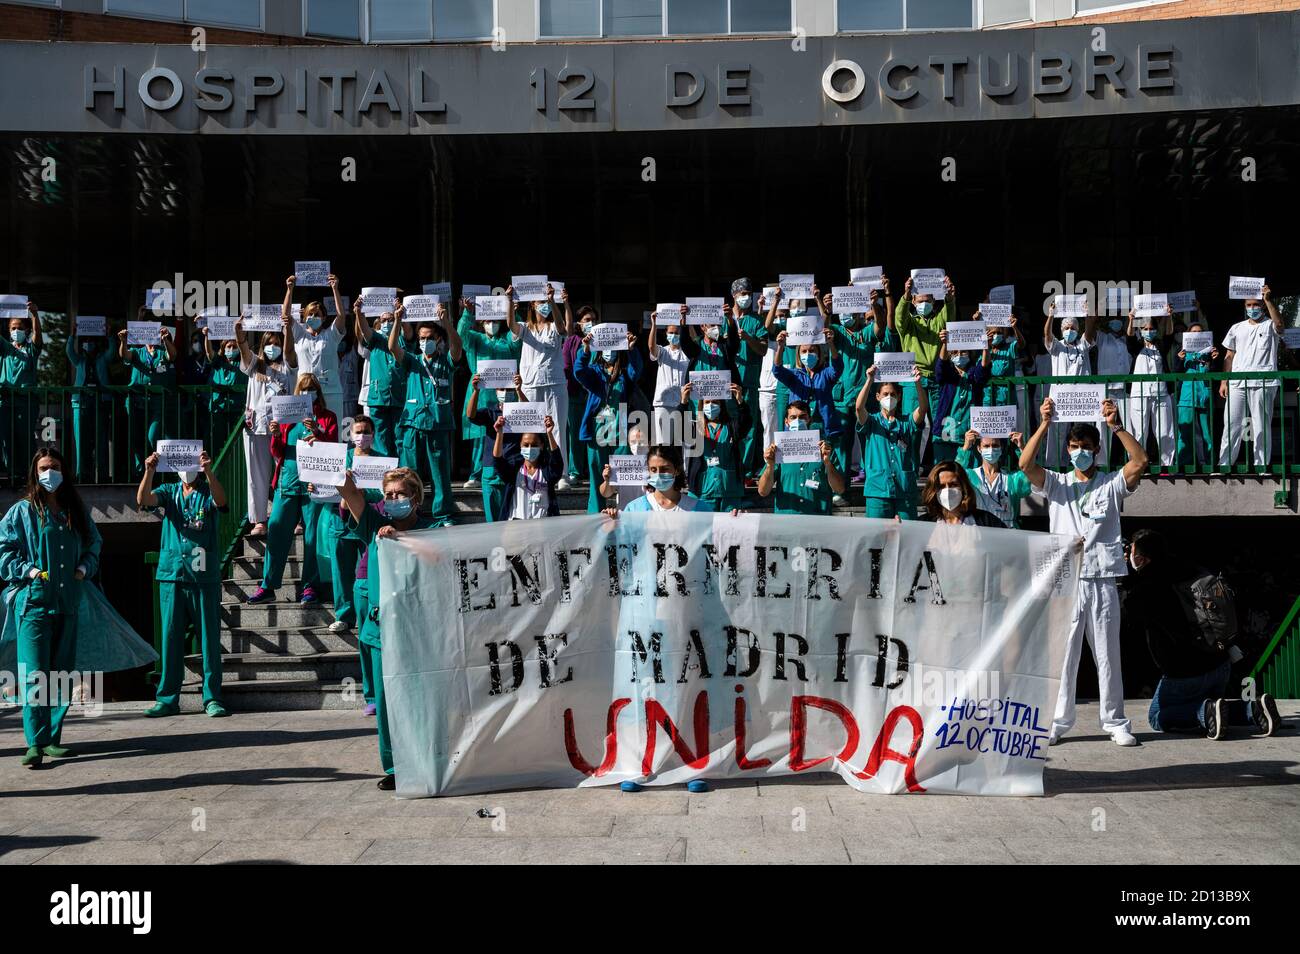 Madrid, Spain. 05th Oct, 2020. Nurses protesting in 12 de Octubre Hospital demanding better working conditions and protesting against the management of the coronavirus crisis in the public health system. They have announced a strike if their petitions are not heard. Credit: Marcos del Mazo/Alamy Live News Stock Photo